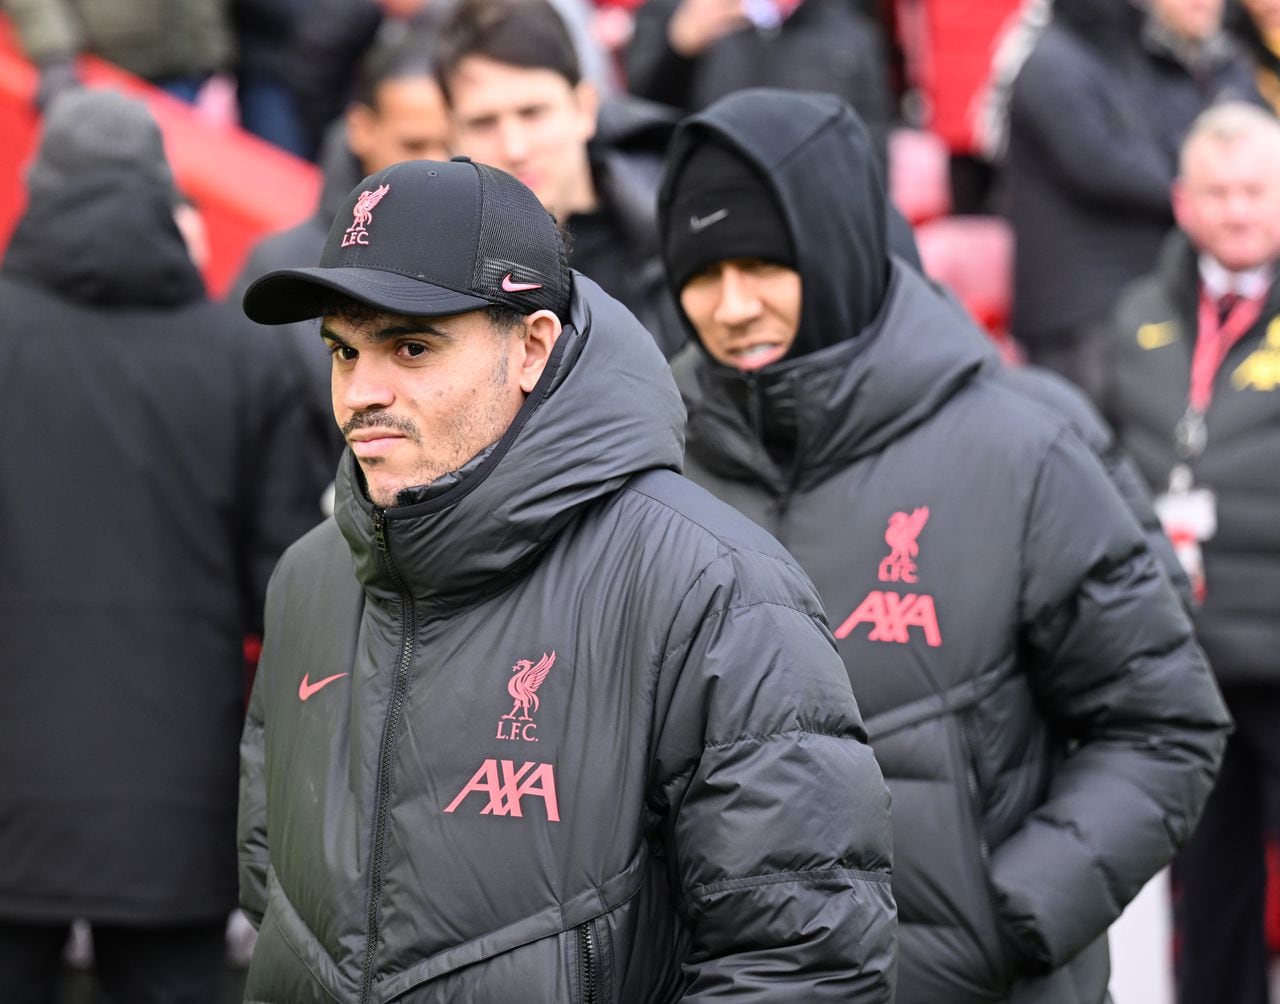 LIVERPOOL, ENGLAND - JANUARY 21: ( THE SUN OUT. THE SUN ON SUNDAY OUT ) Roberto Firmino of Liverpool Luis Diaz of Liverpool before the Premier League match between Liverpool FC and Chelsea FC at Anfield on January 21, 2023 in Liverpool, England. (Photo by Andrew Powell/Liverpool FC via Getty Images)